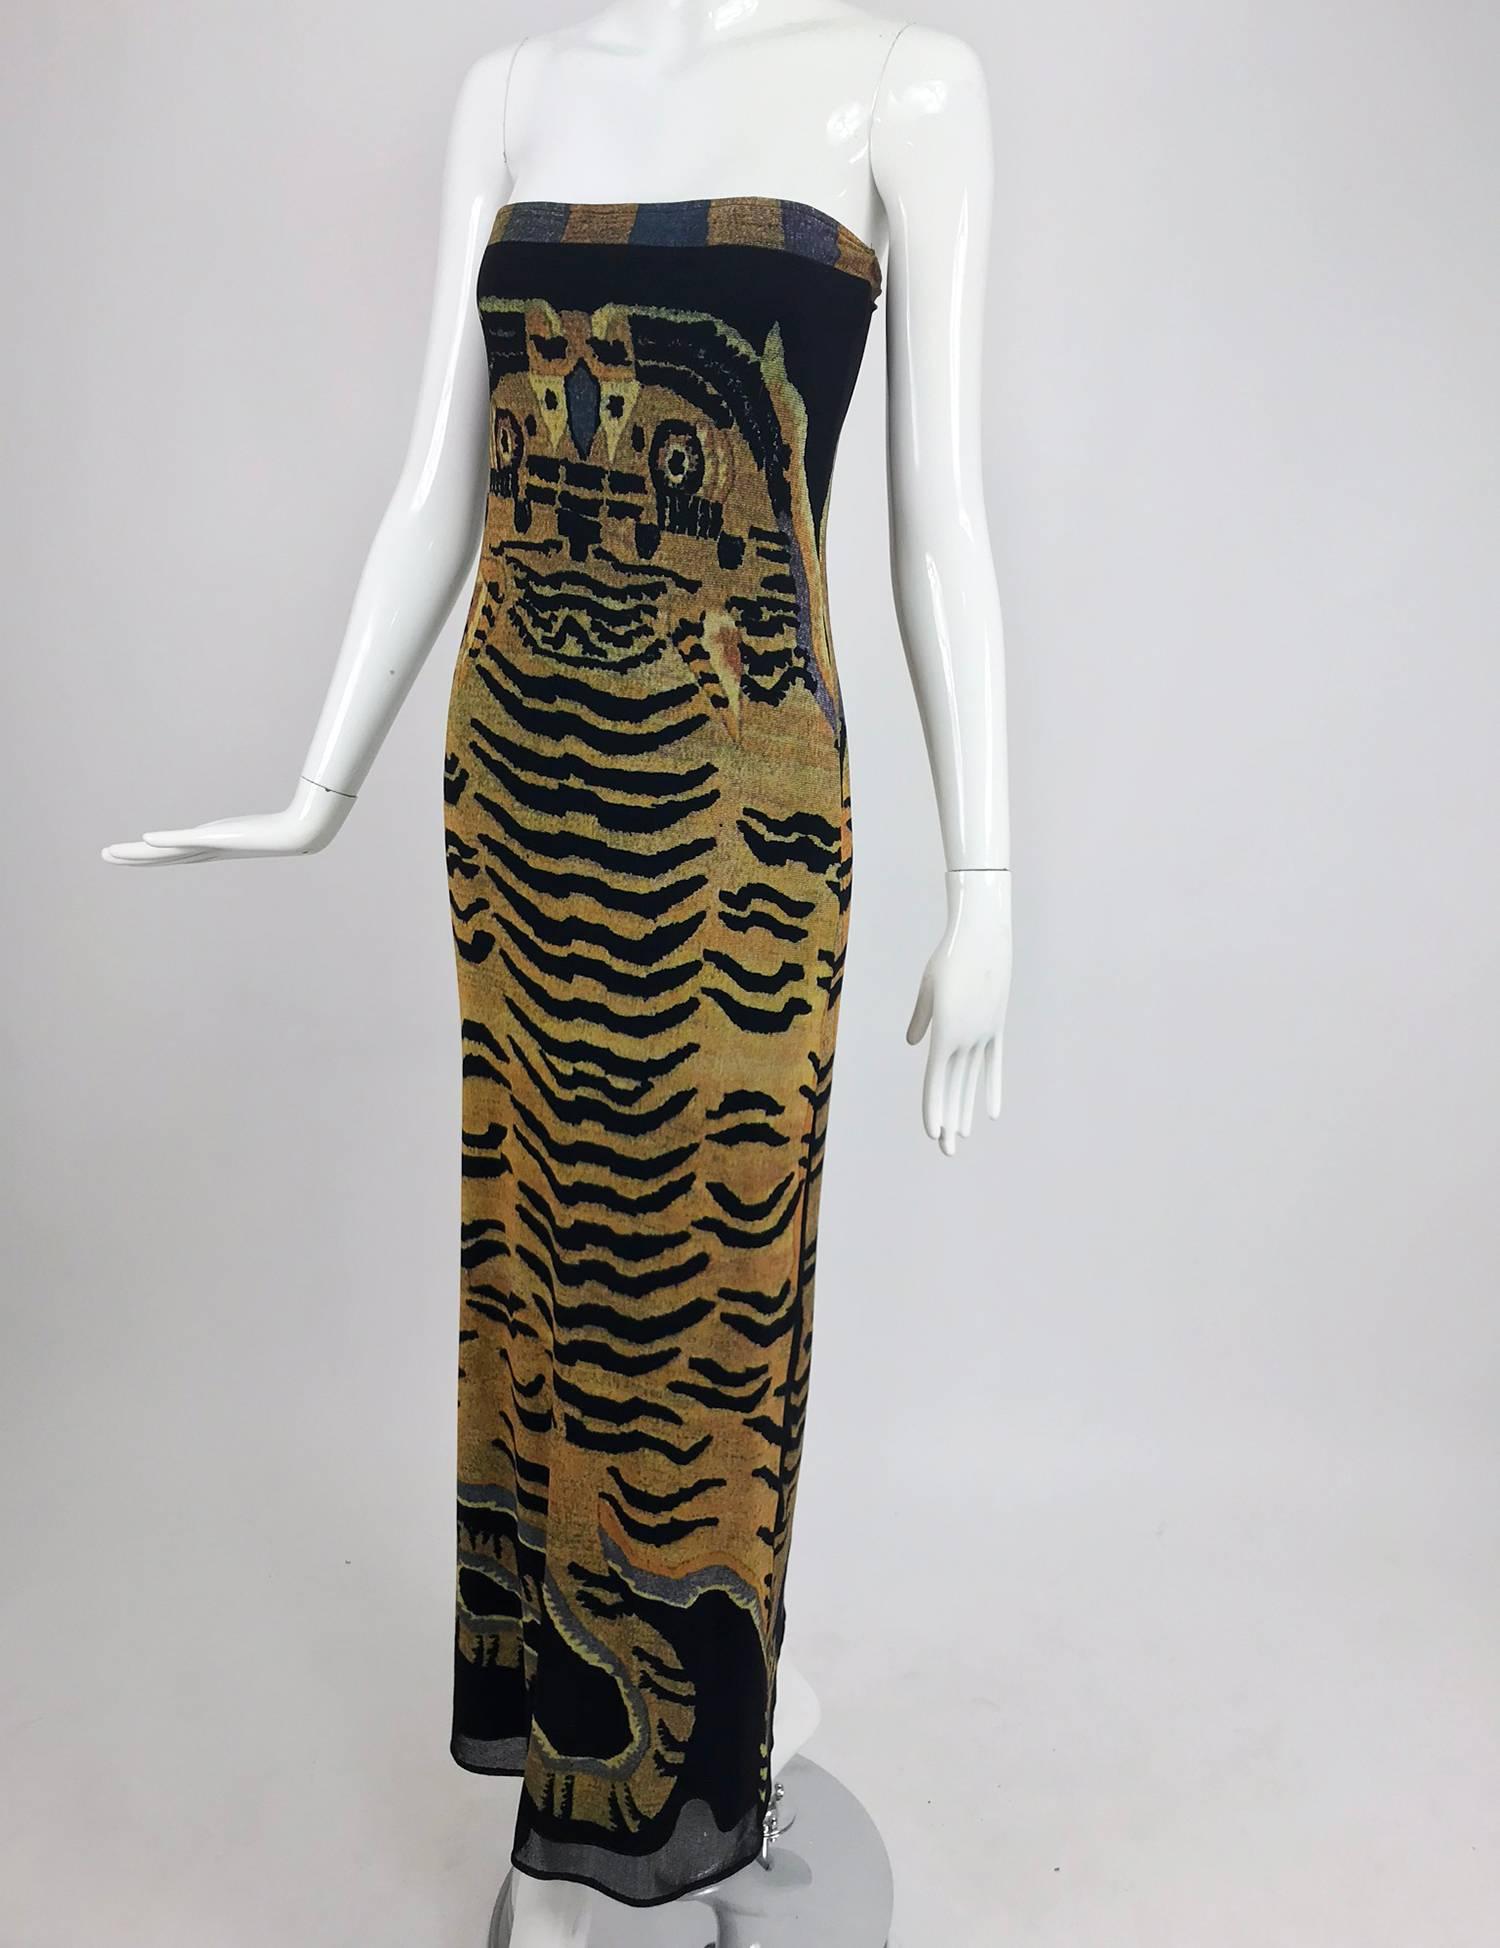 Vivienne Tam Tiger print strapless stretch mesh maxi dress in the collection of The Museum at FIT New York.... Spring 1998...A Chinese influence of dragons and Tibetan tiger rugs...Strapless dress in an exotic tiger skin print front and back...Nylon